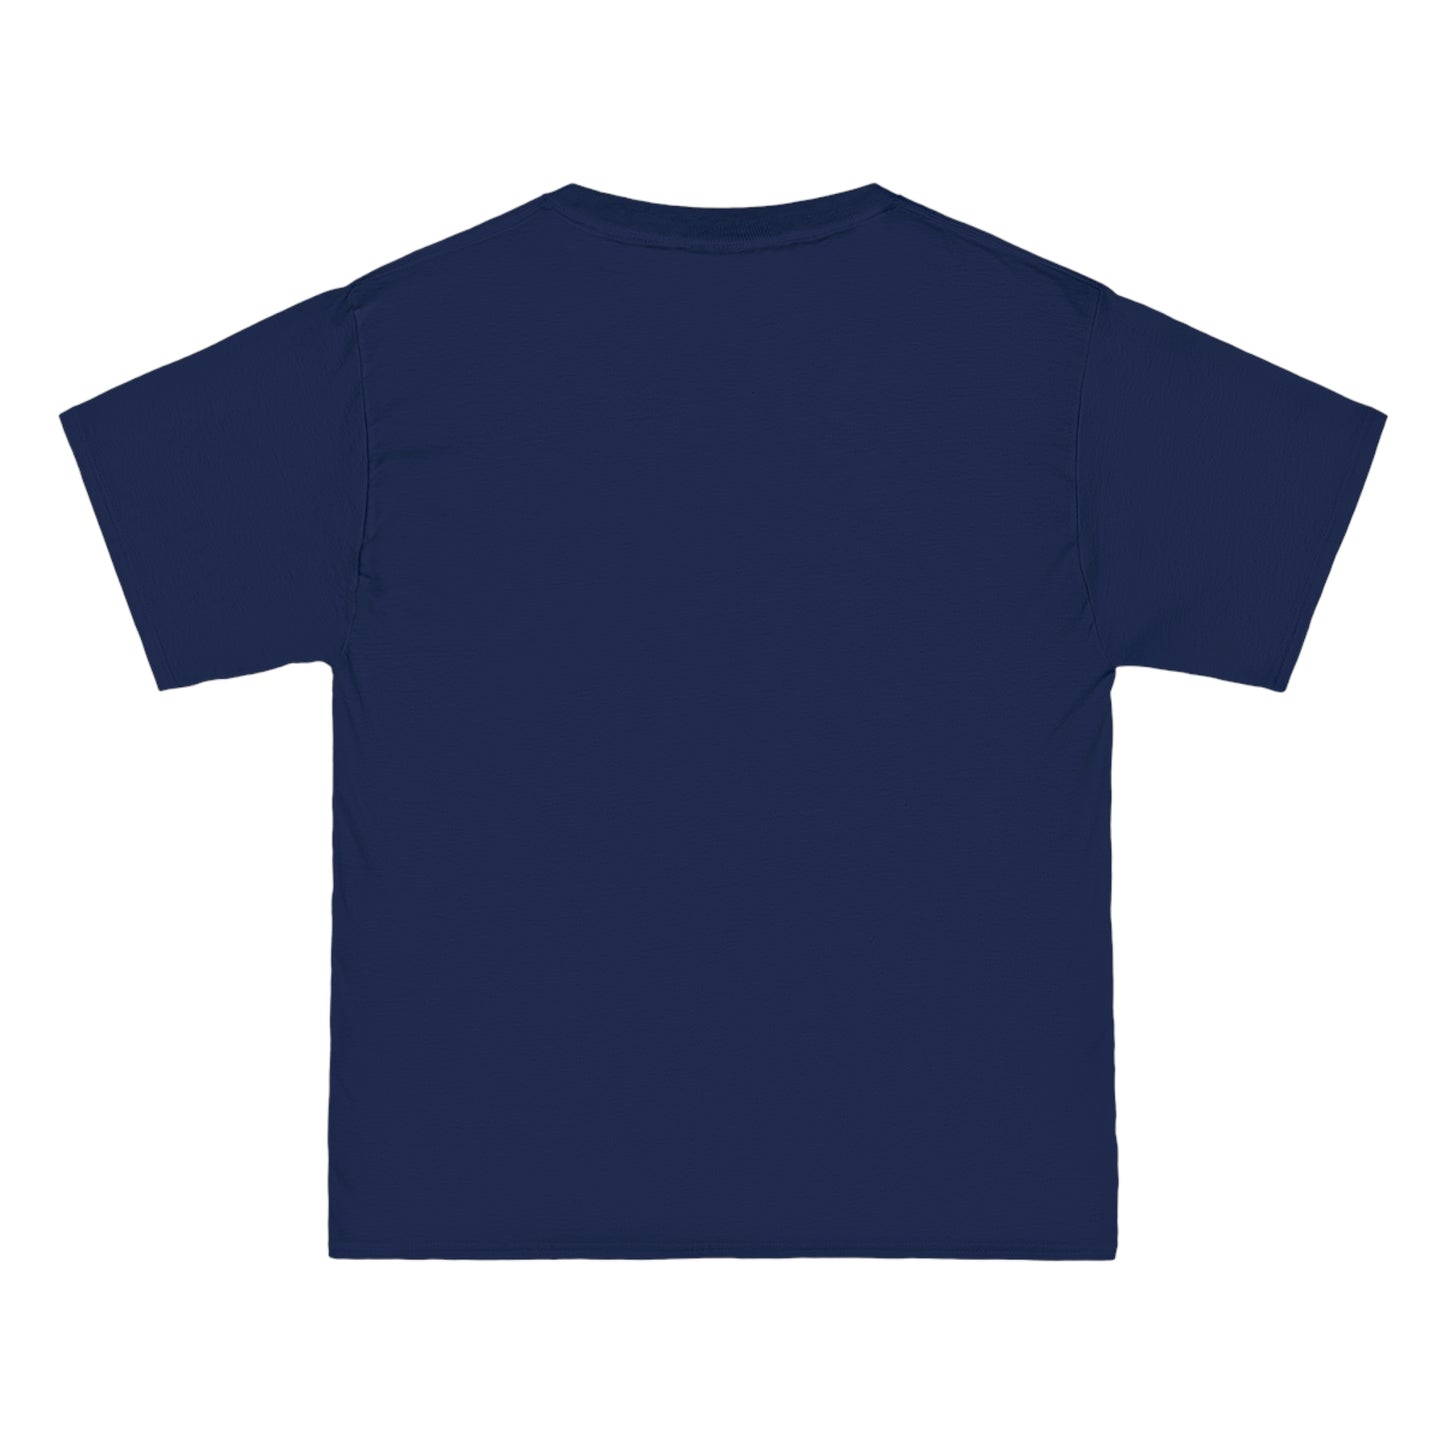 Scales Short-Sleeve T-Shirt